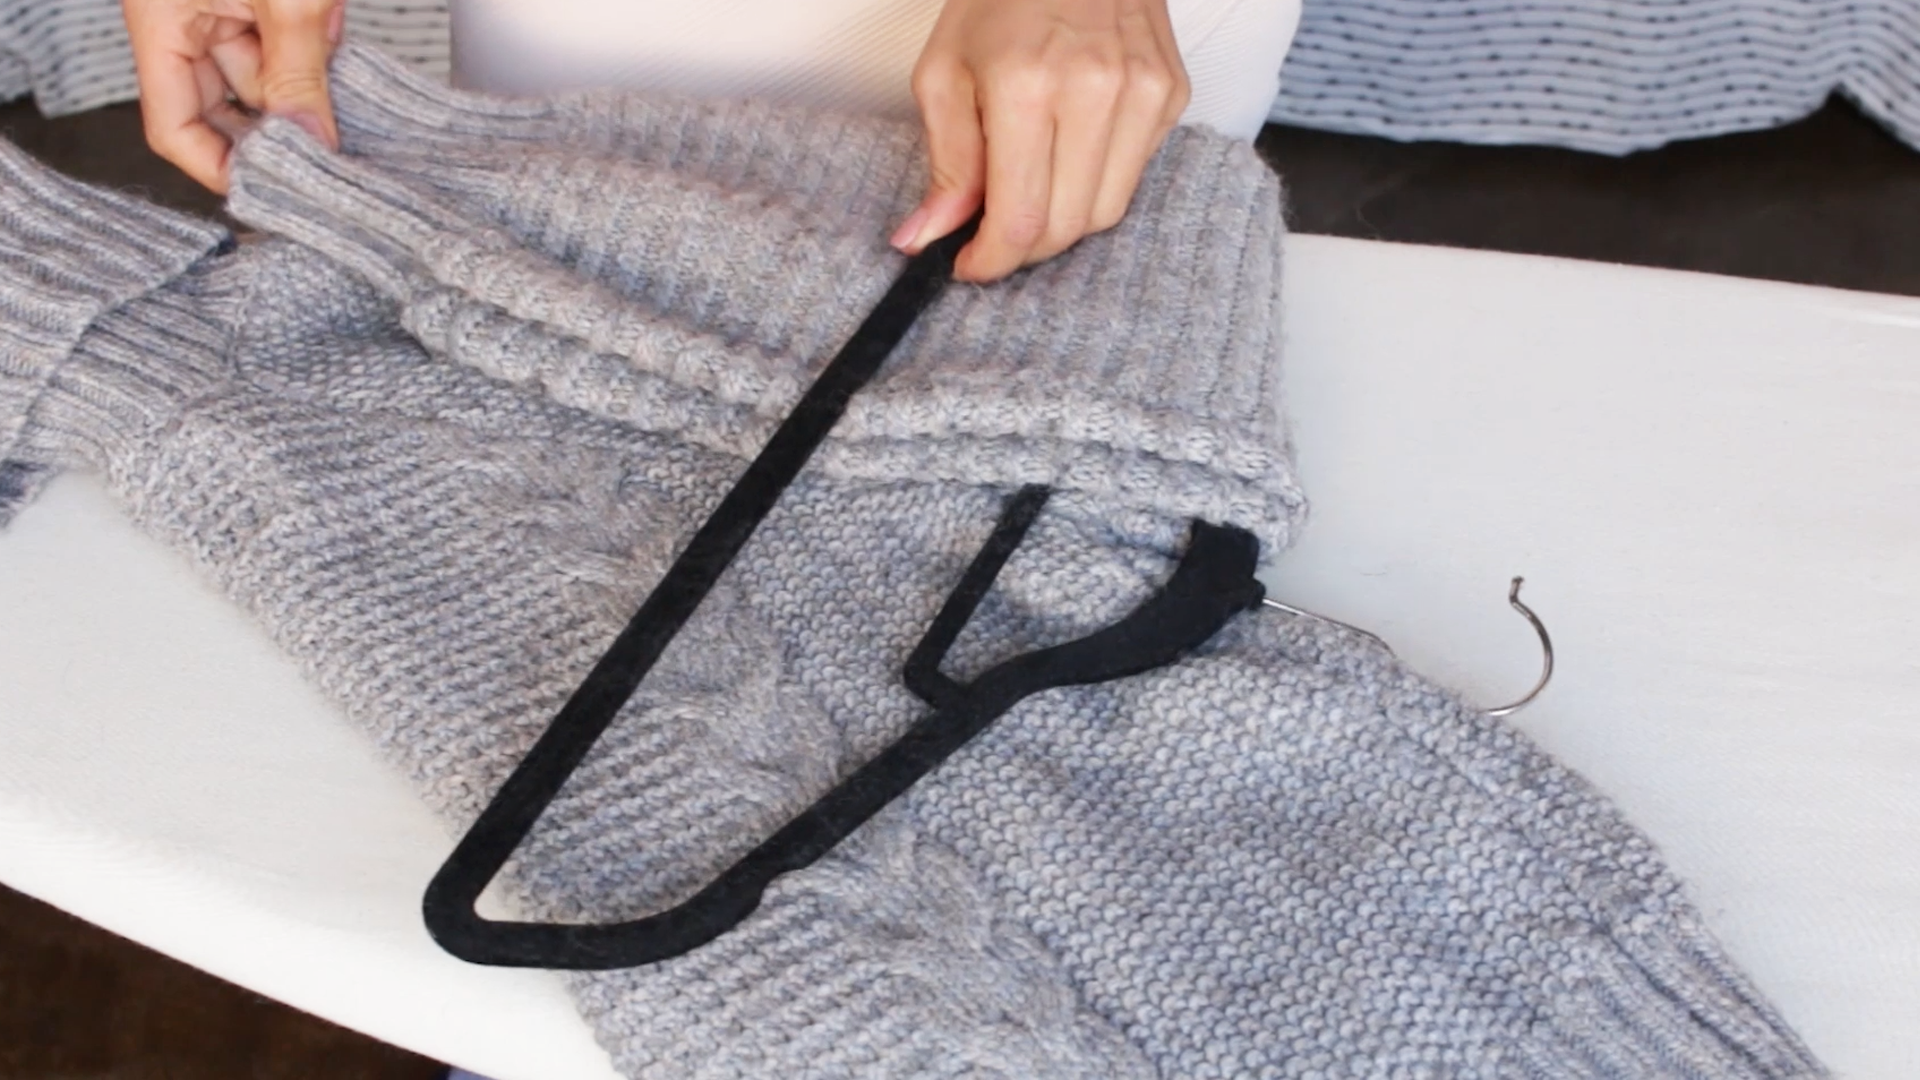 How to Hang Sweaters Without Stretching the Shoulders